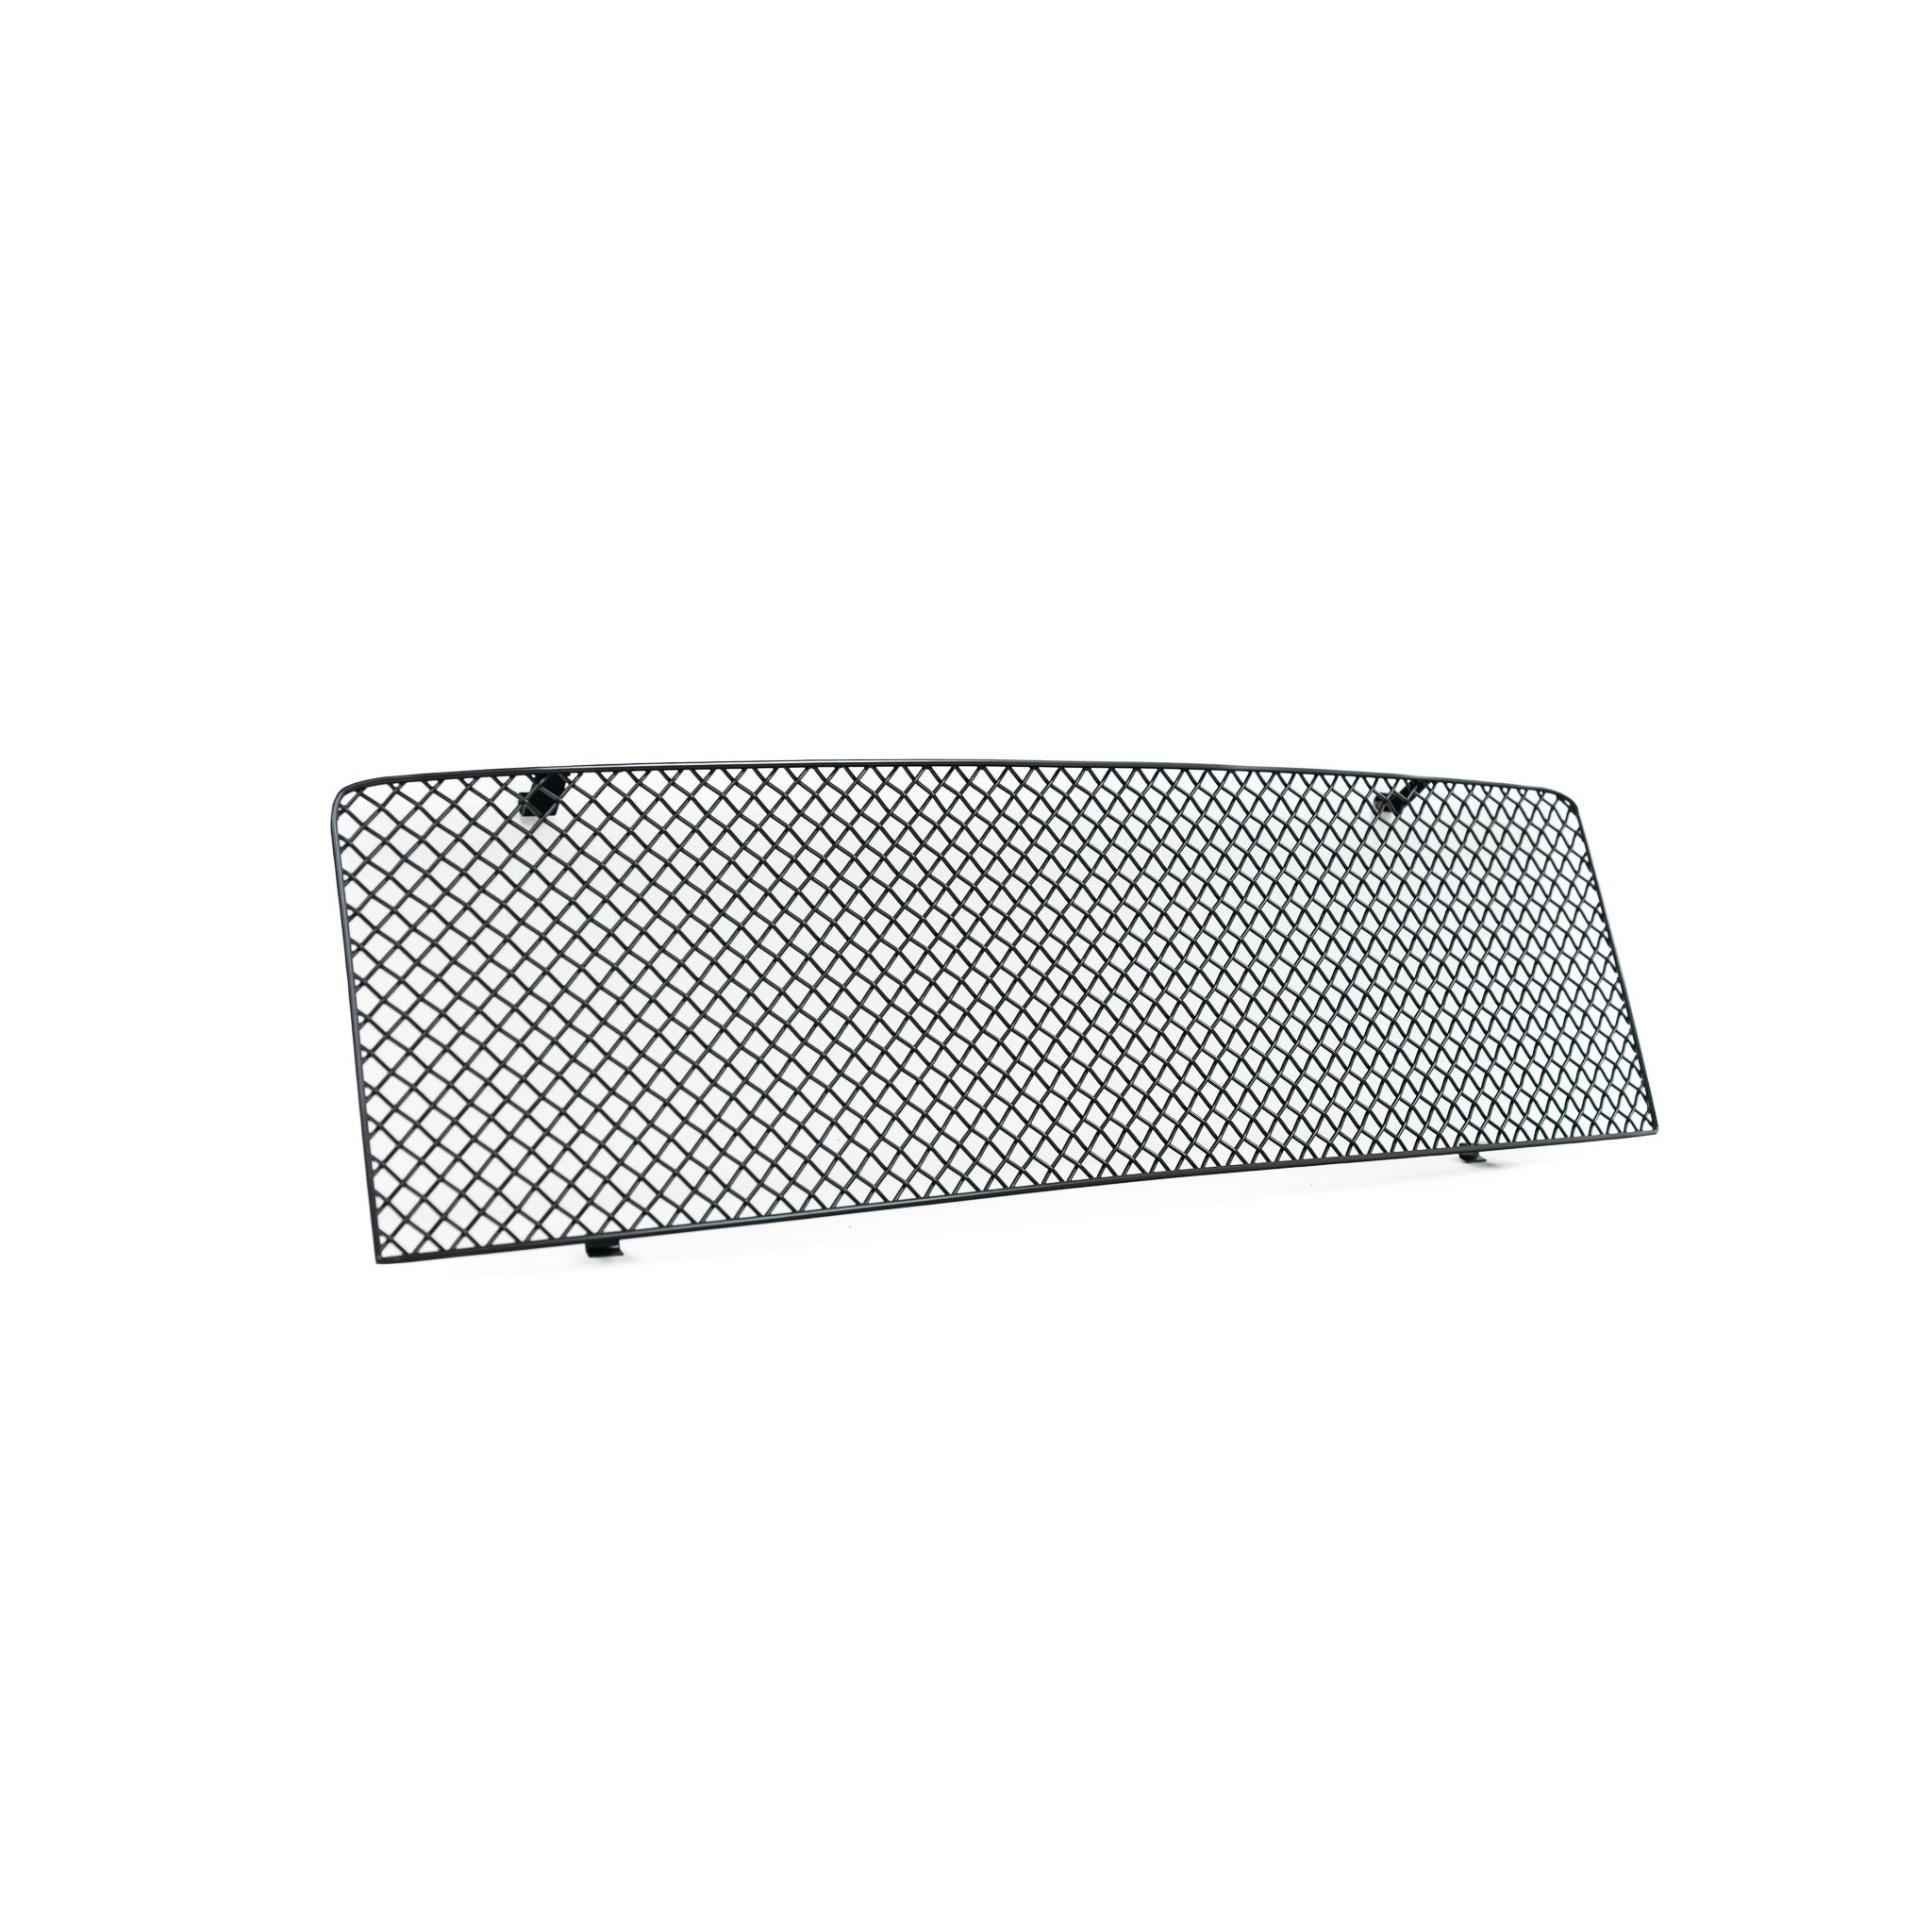 Car Grille, Mesh Grille, Car Grill Mesh Aluminum Mesh, For Car For Vehicle